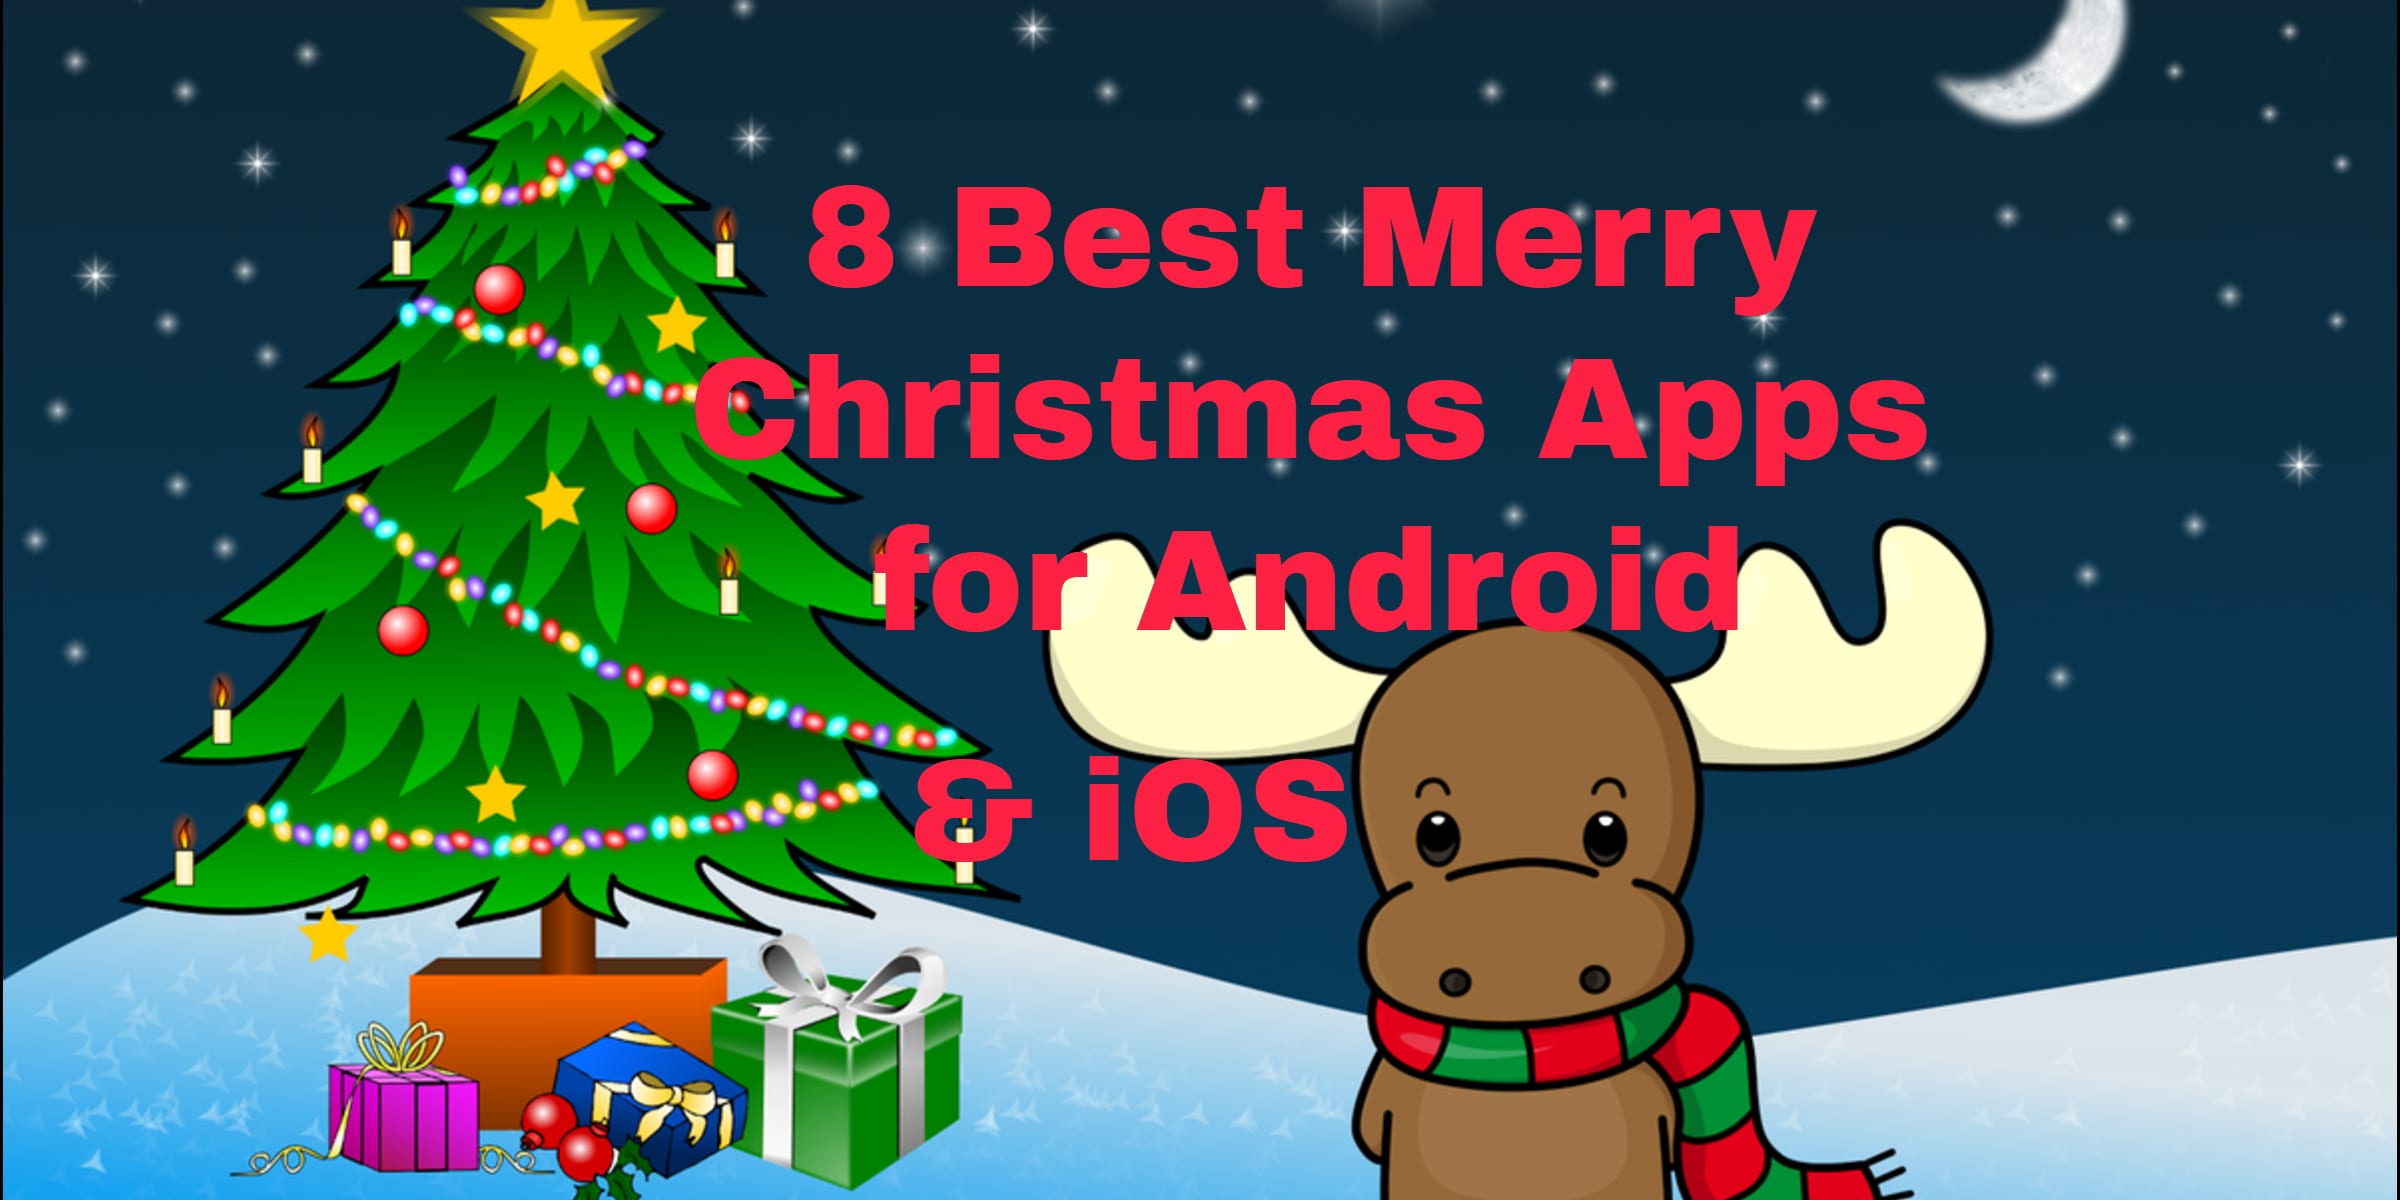 8-merry-christmas-apps-for-android-iphone-free-apps-for-android